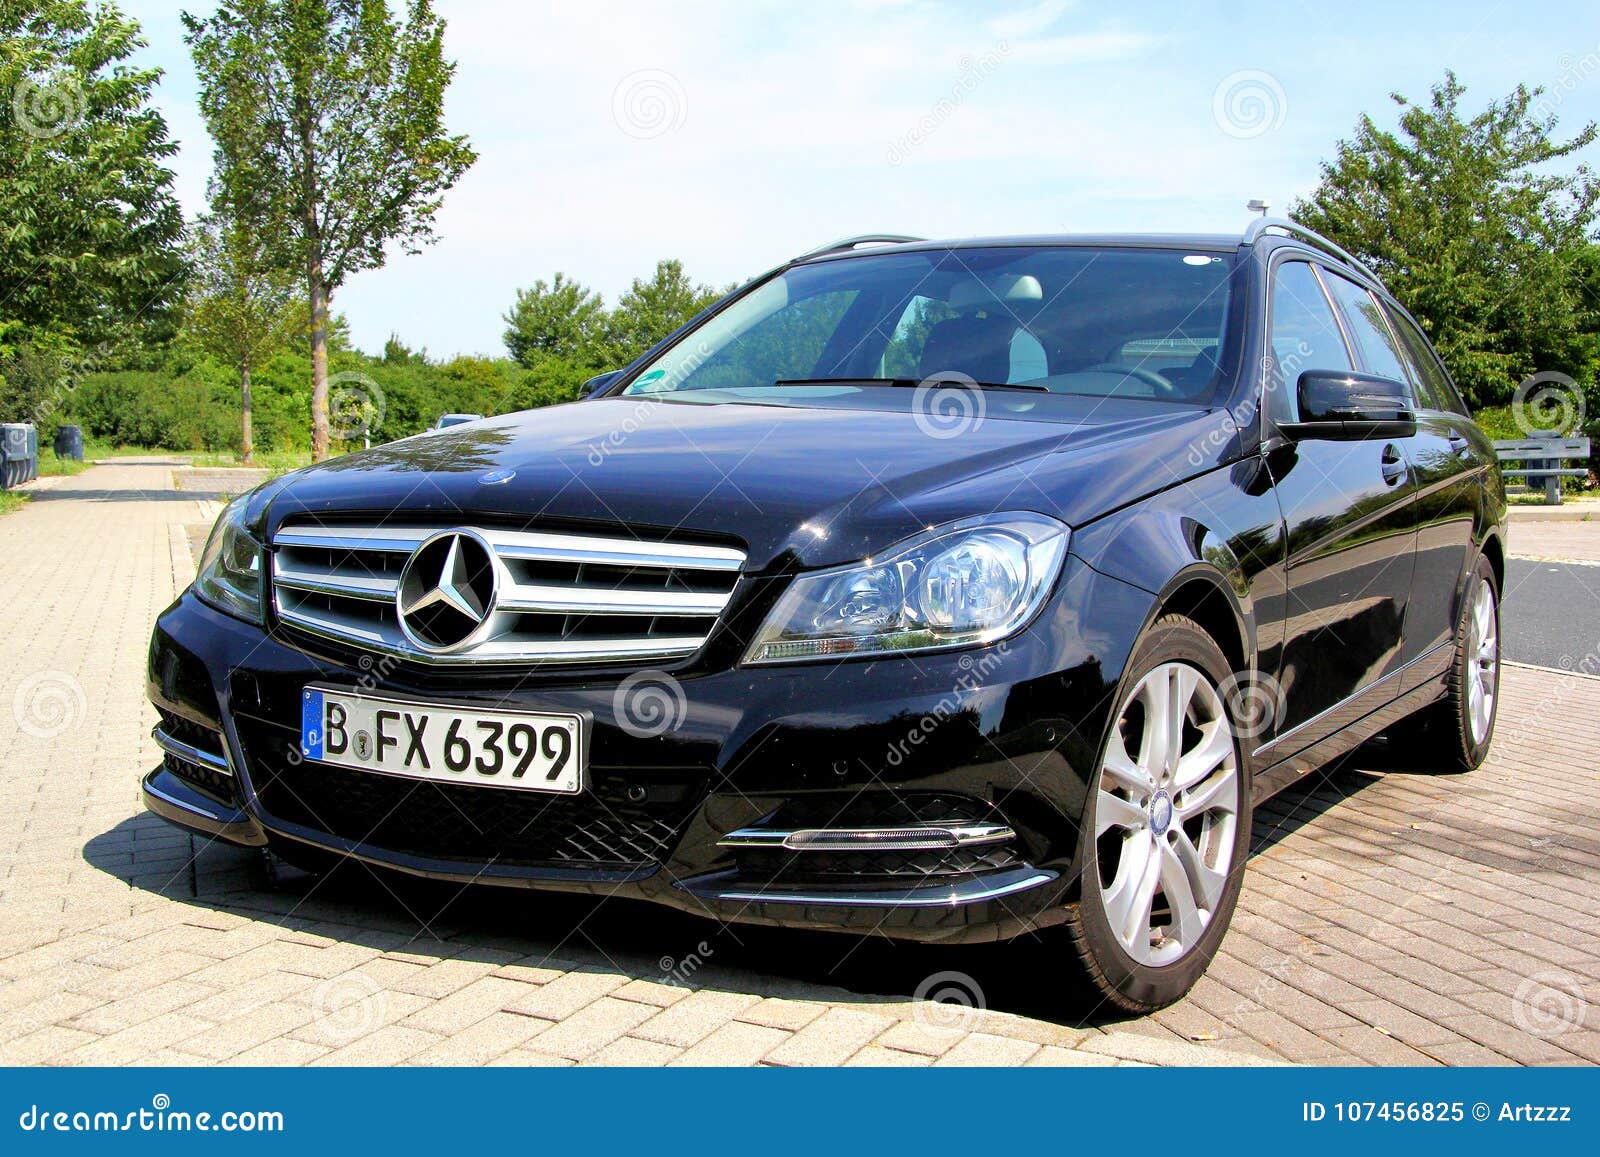 Used W204 Mercedes-Benz C-Class from RM 40k. Maintenance and repair costs?